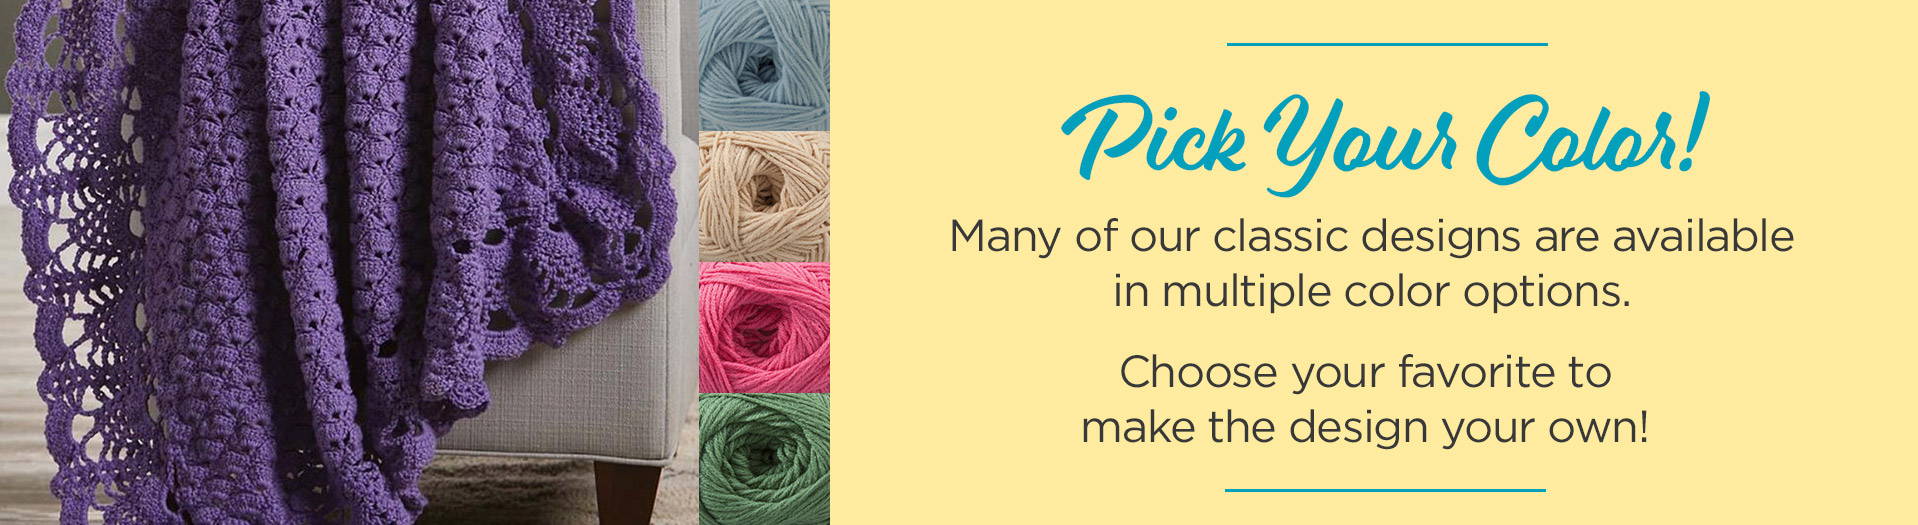 Pick your color! Many of our classic designs are available in multiple color options. Choose your favorite to make the design your own! 